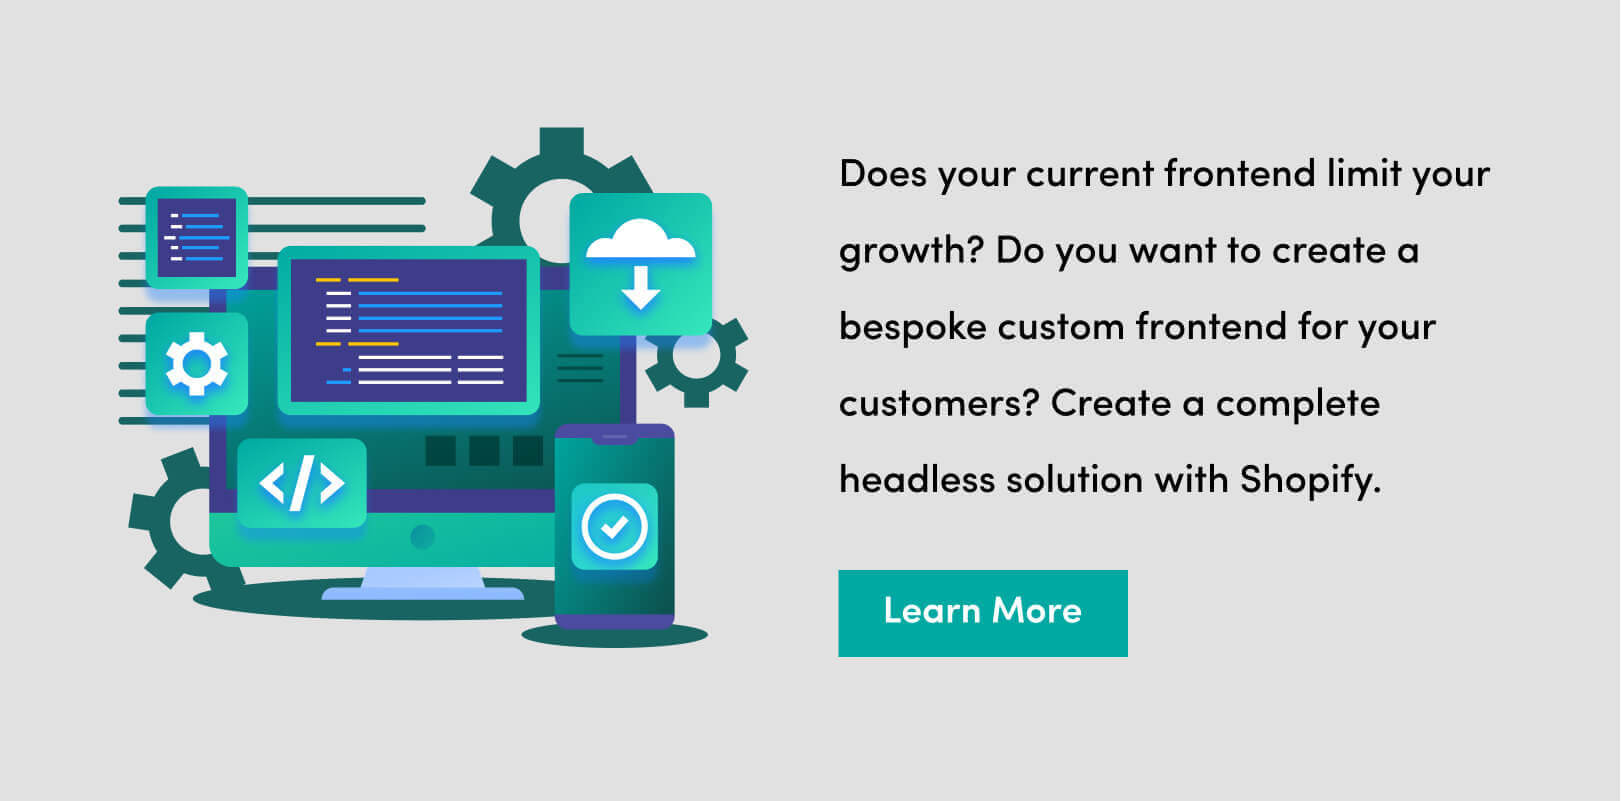 Create a complete headless solution with Shopify.